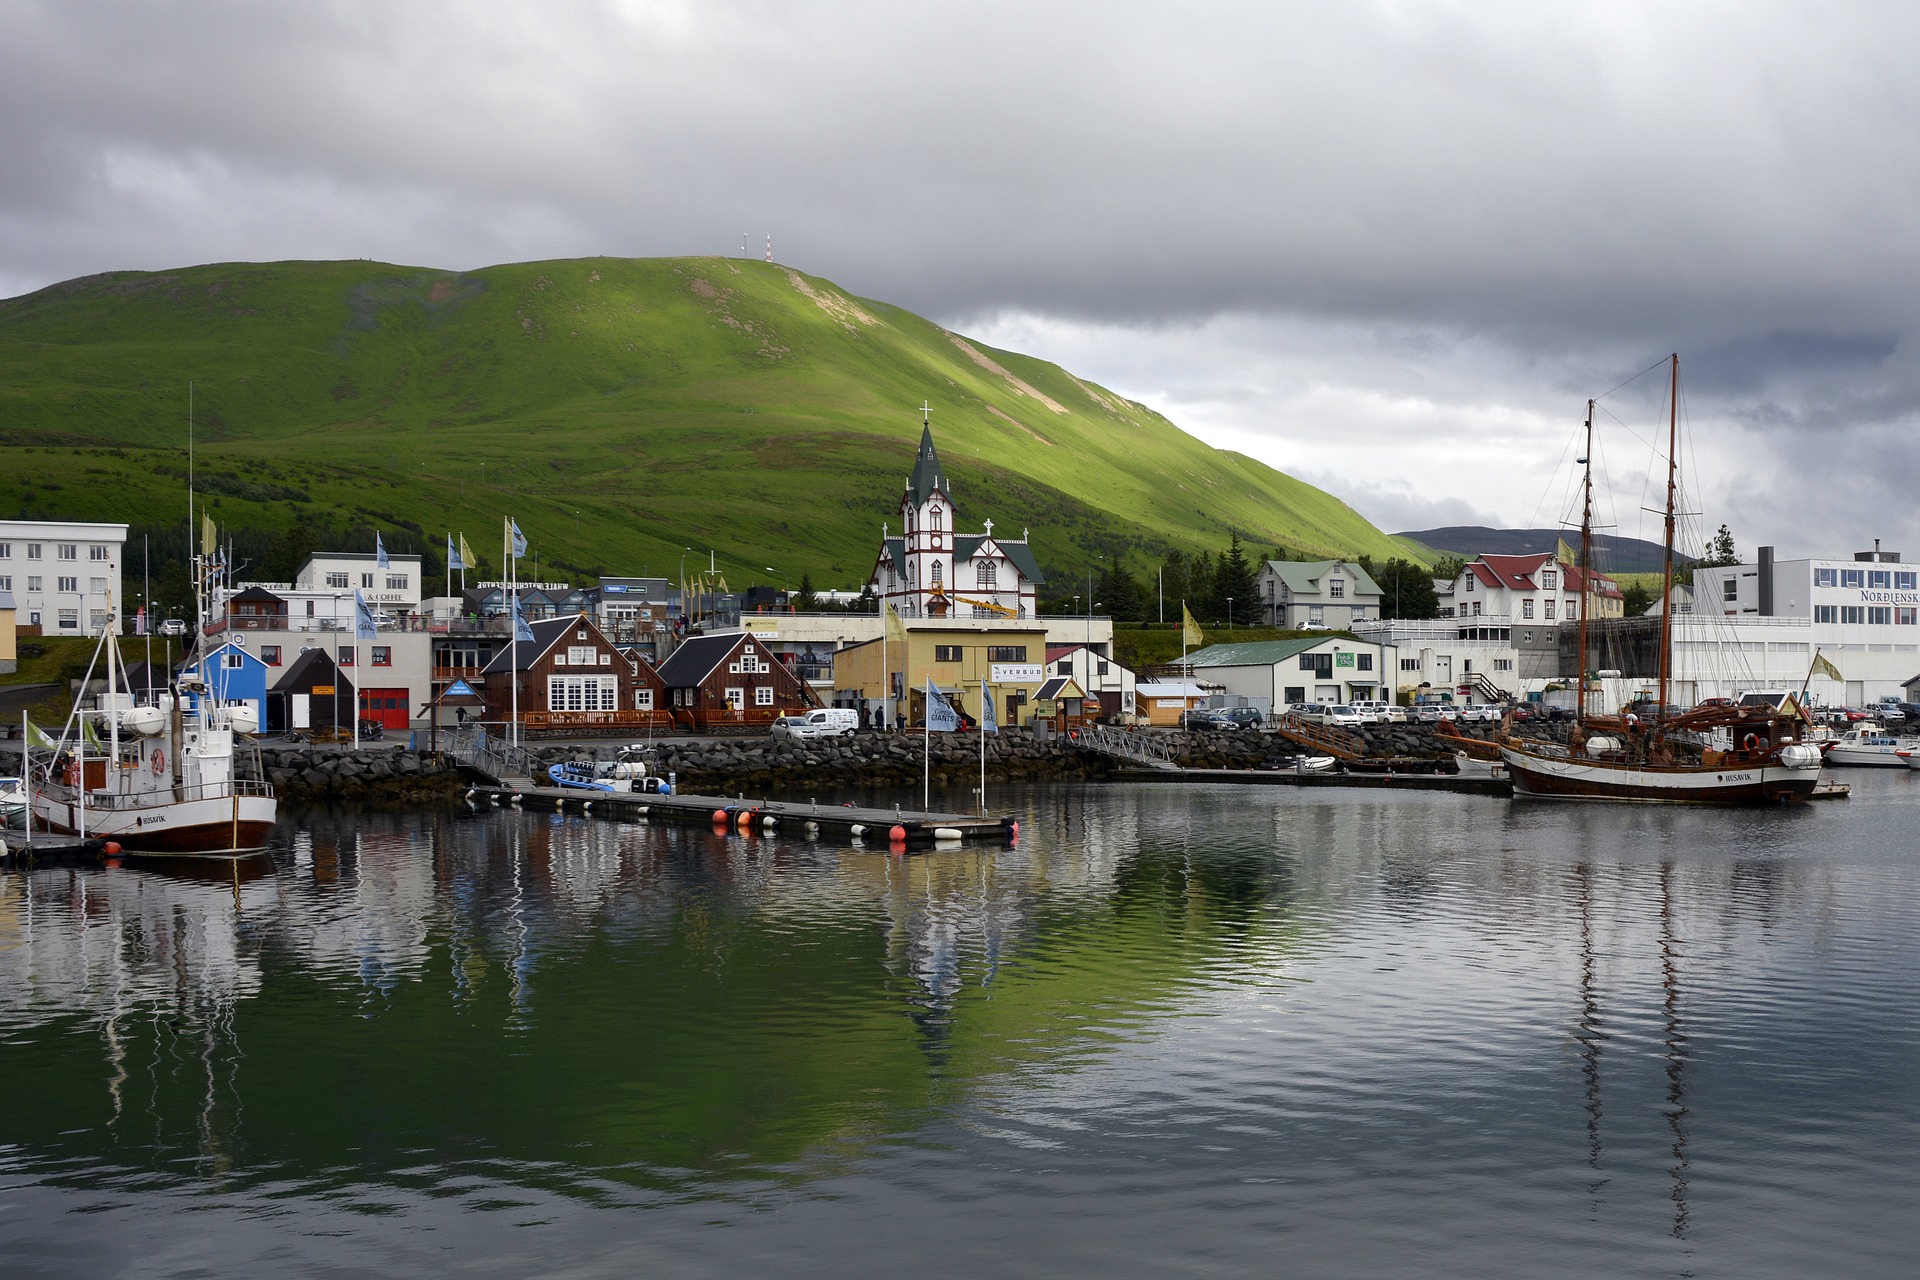 Husavik harbor and town with boats, and mountains on the background